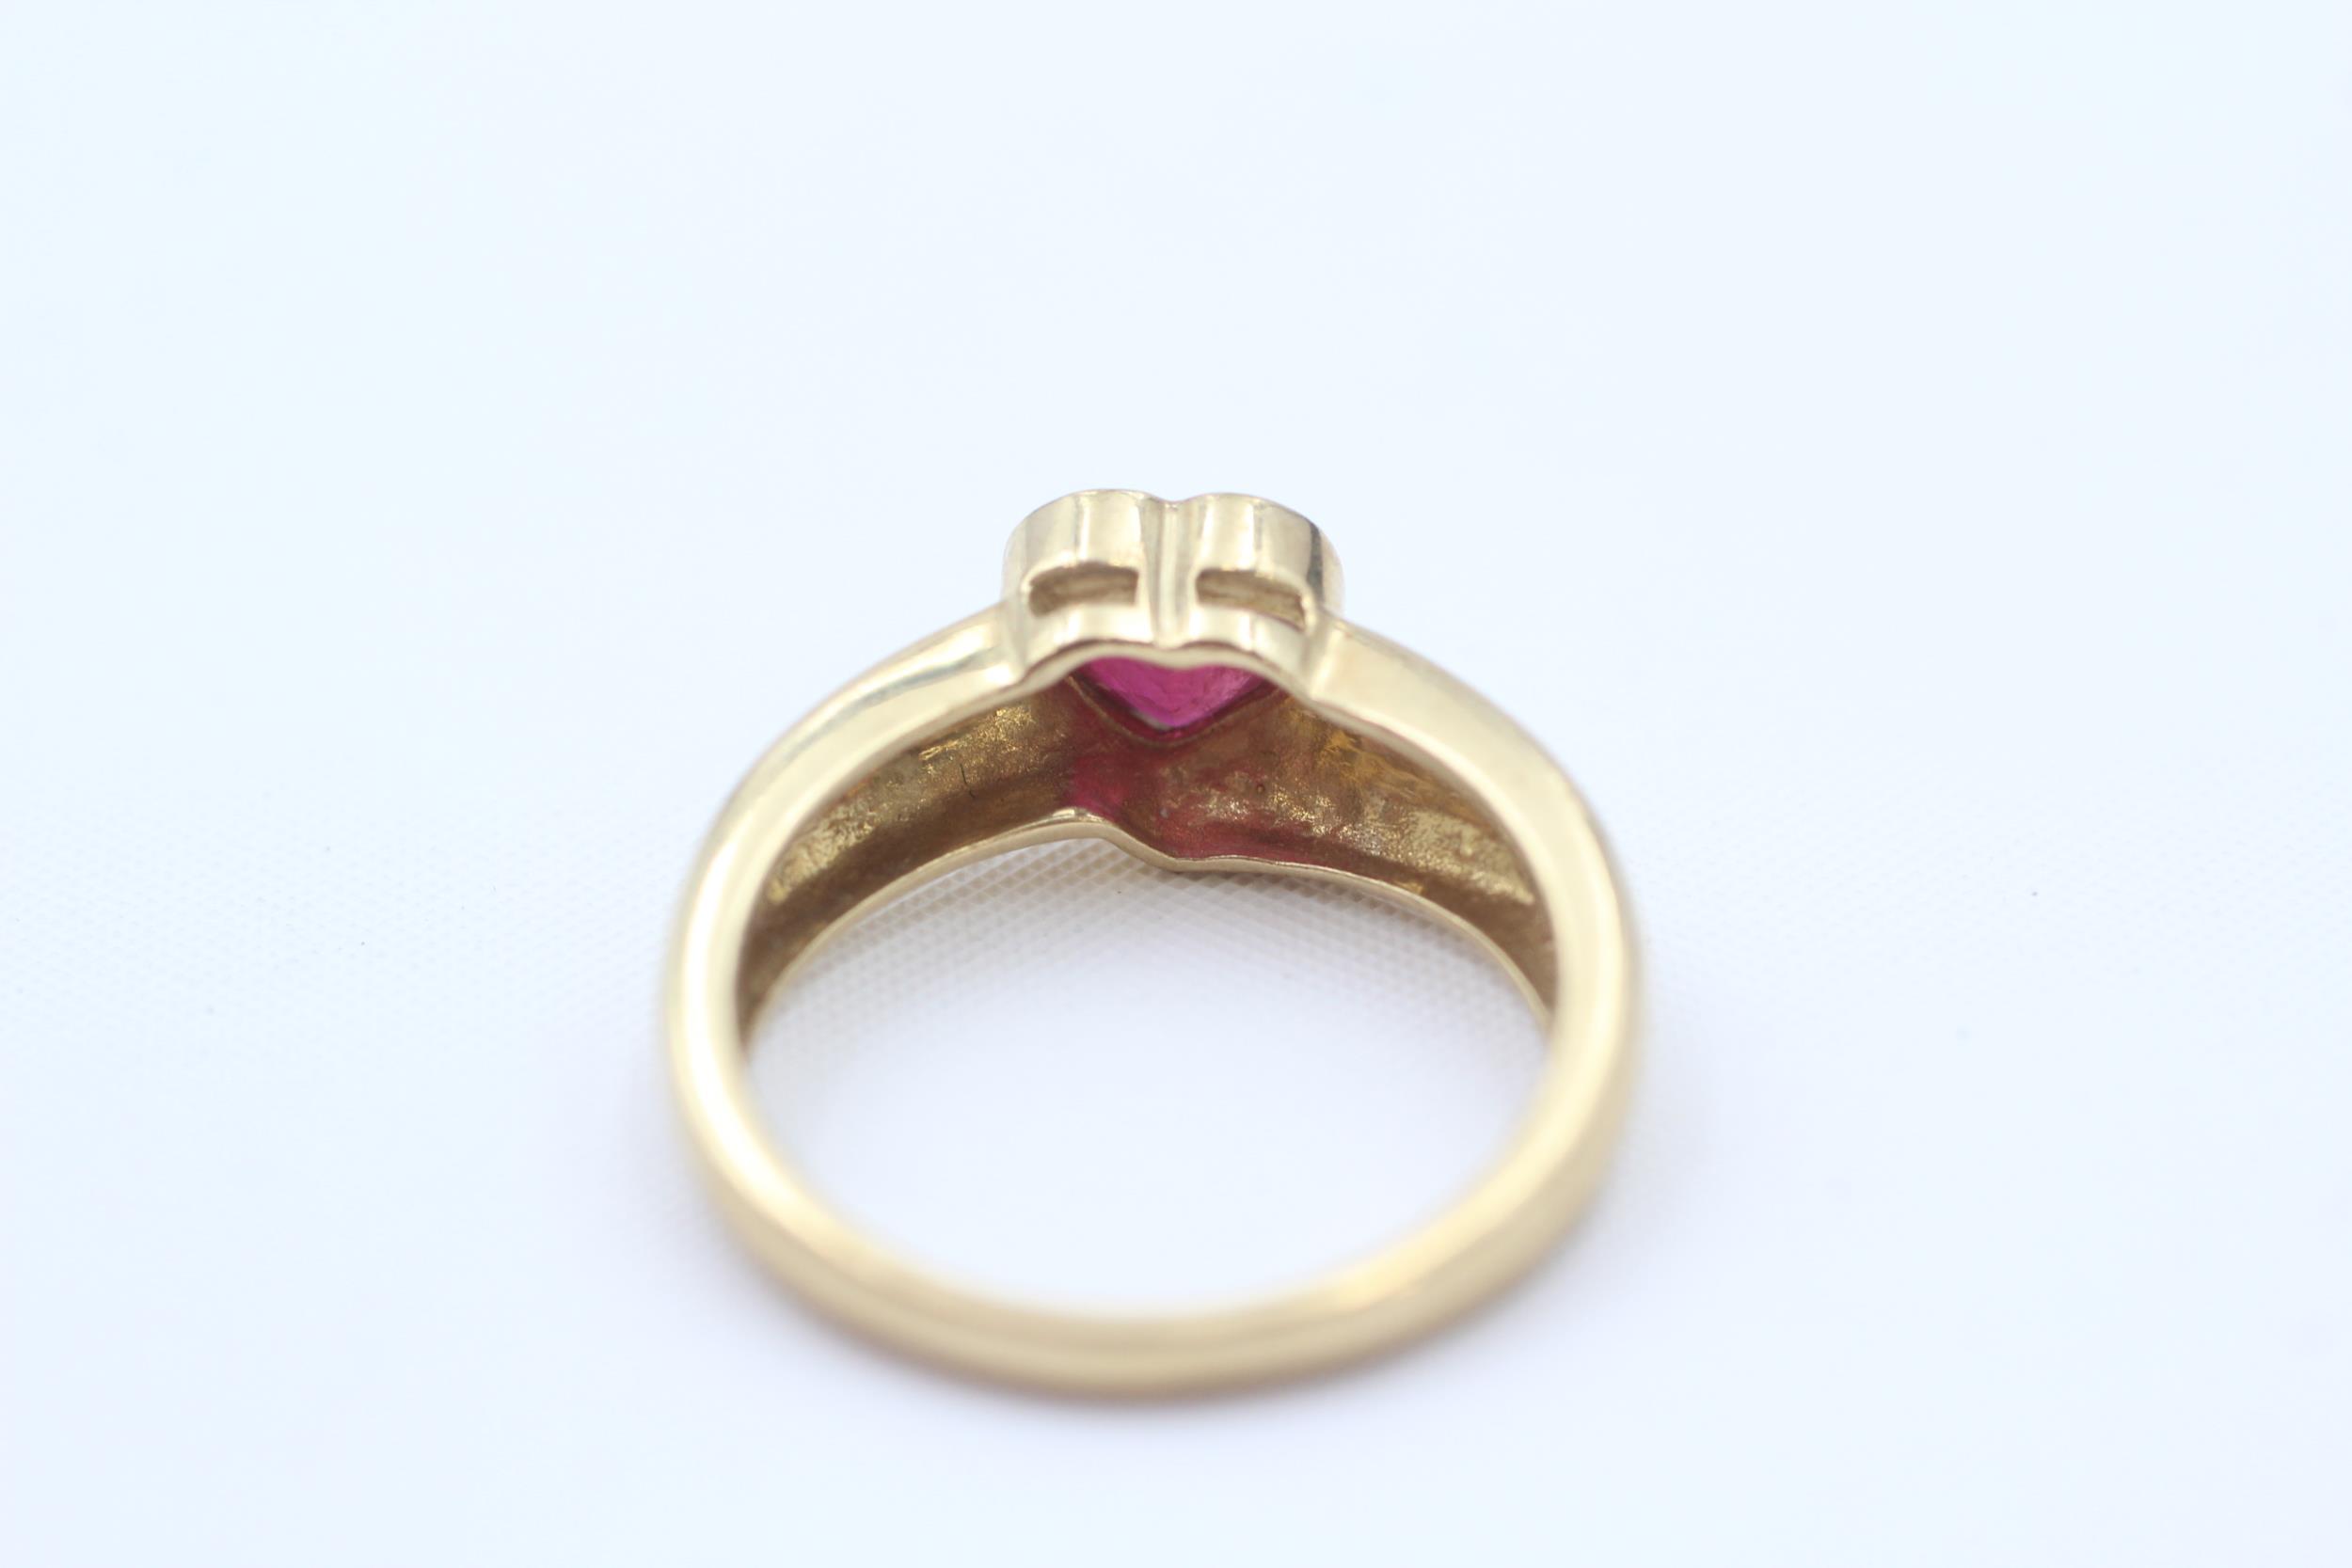 9ct gold heart shaped ruby solitaire ring (3.3g) Size N - Image 4 of 5